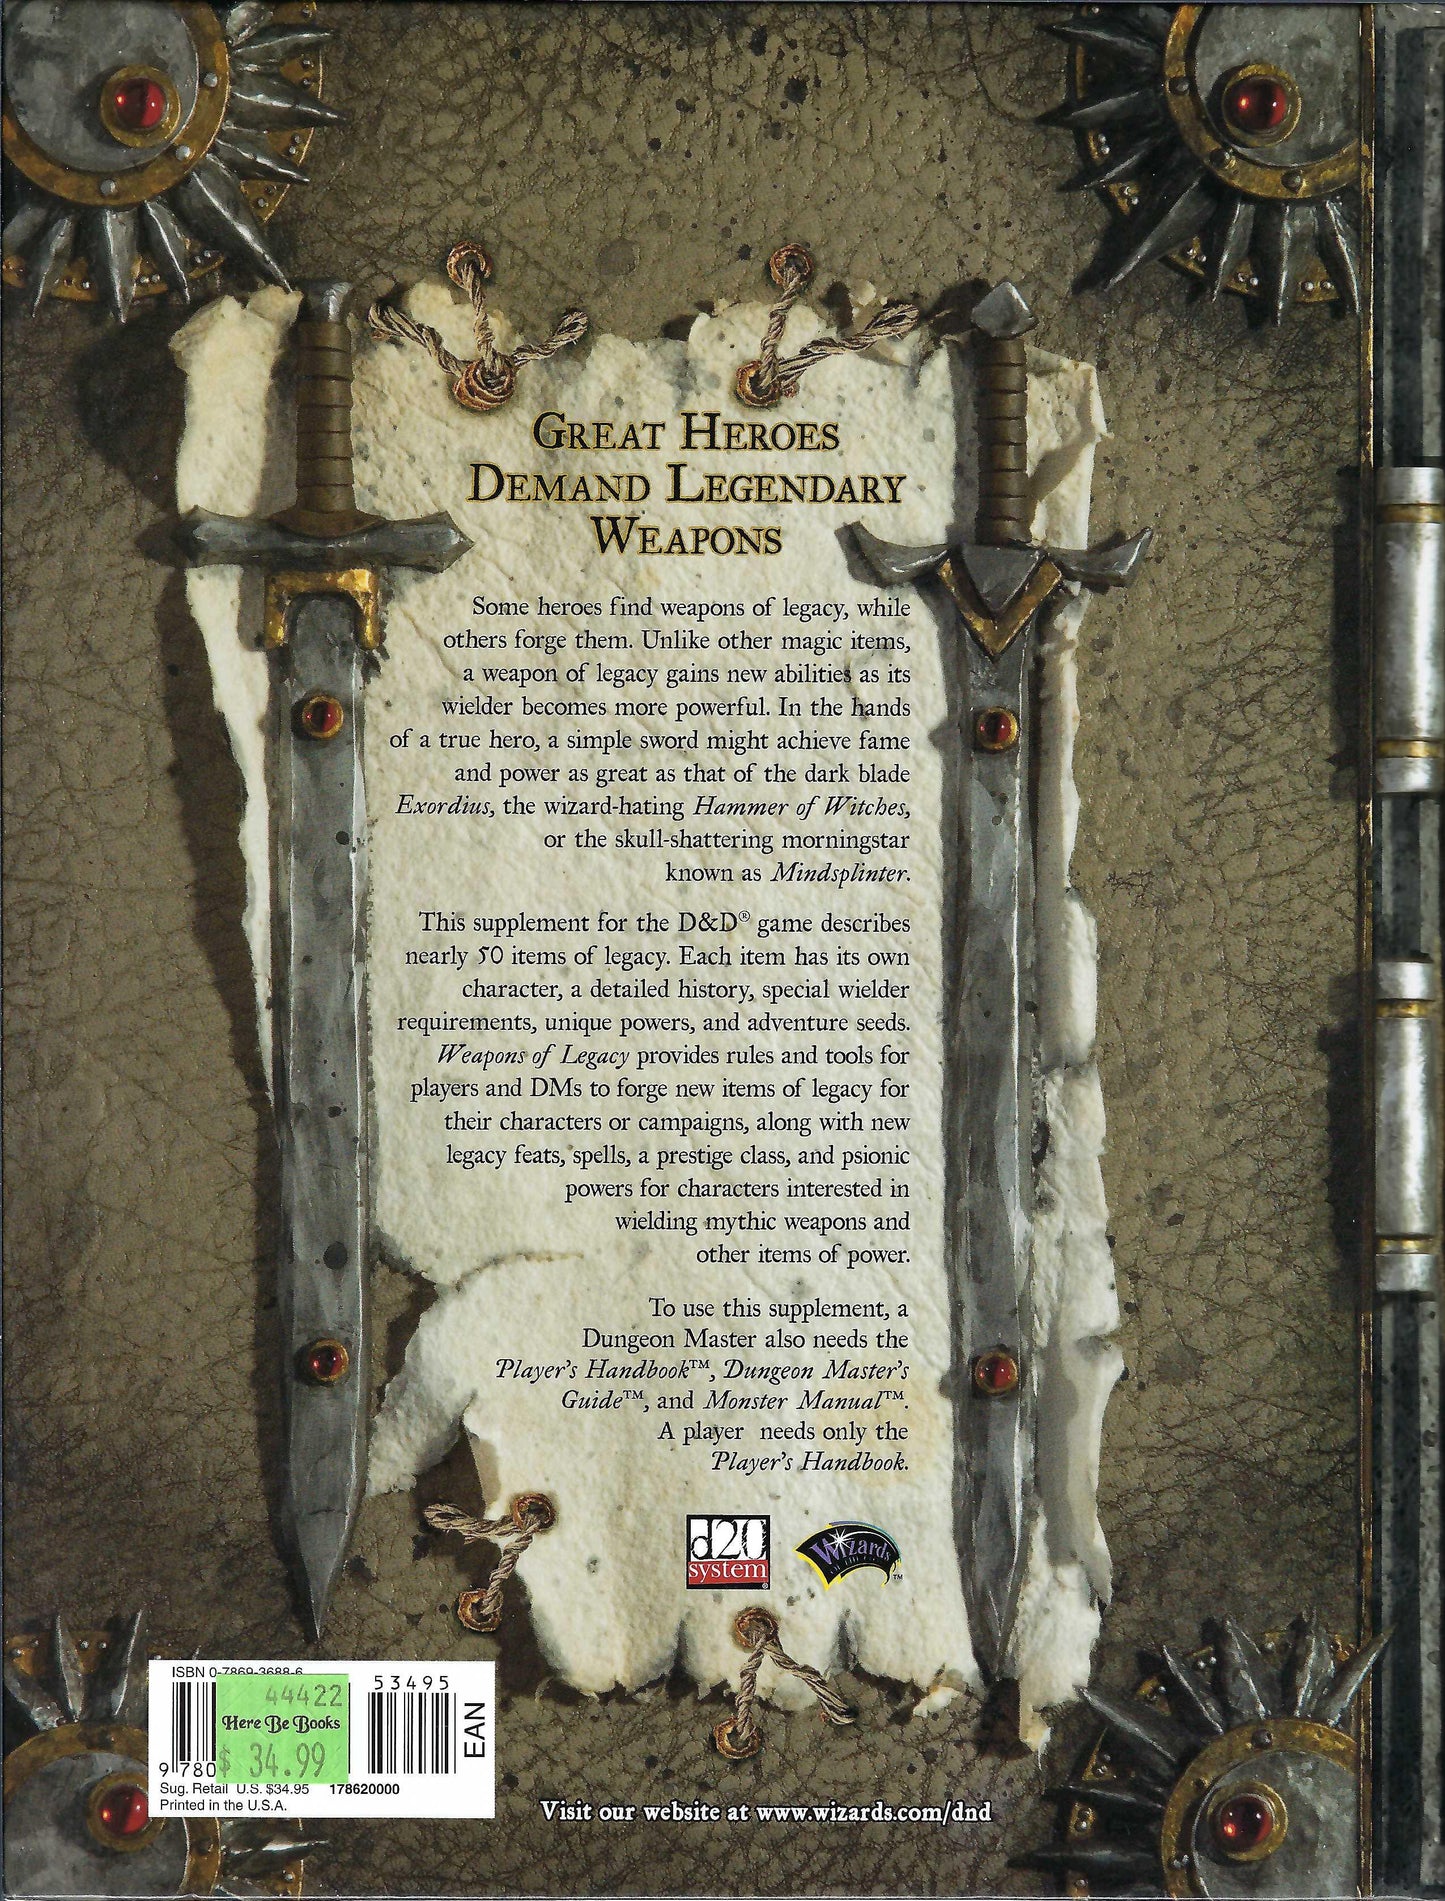 Weapons of Legacy back cover